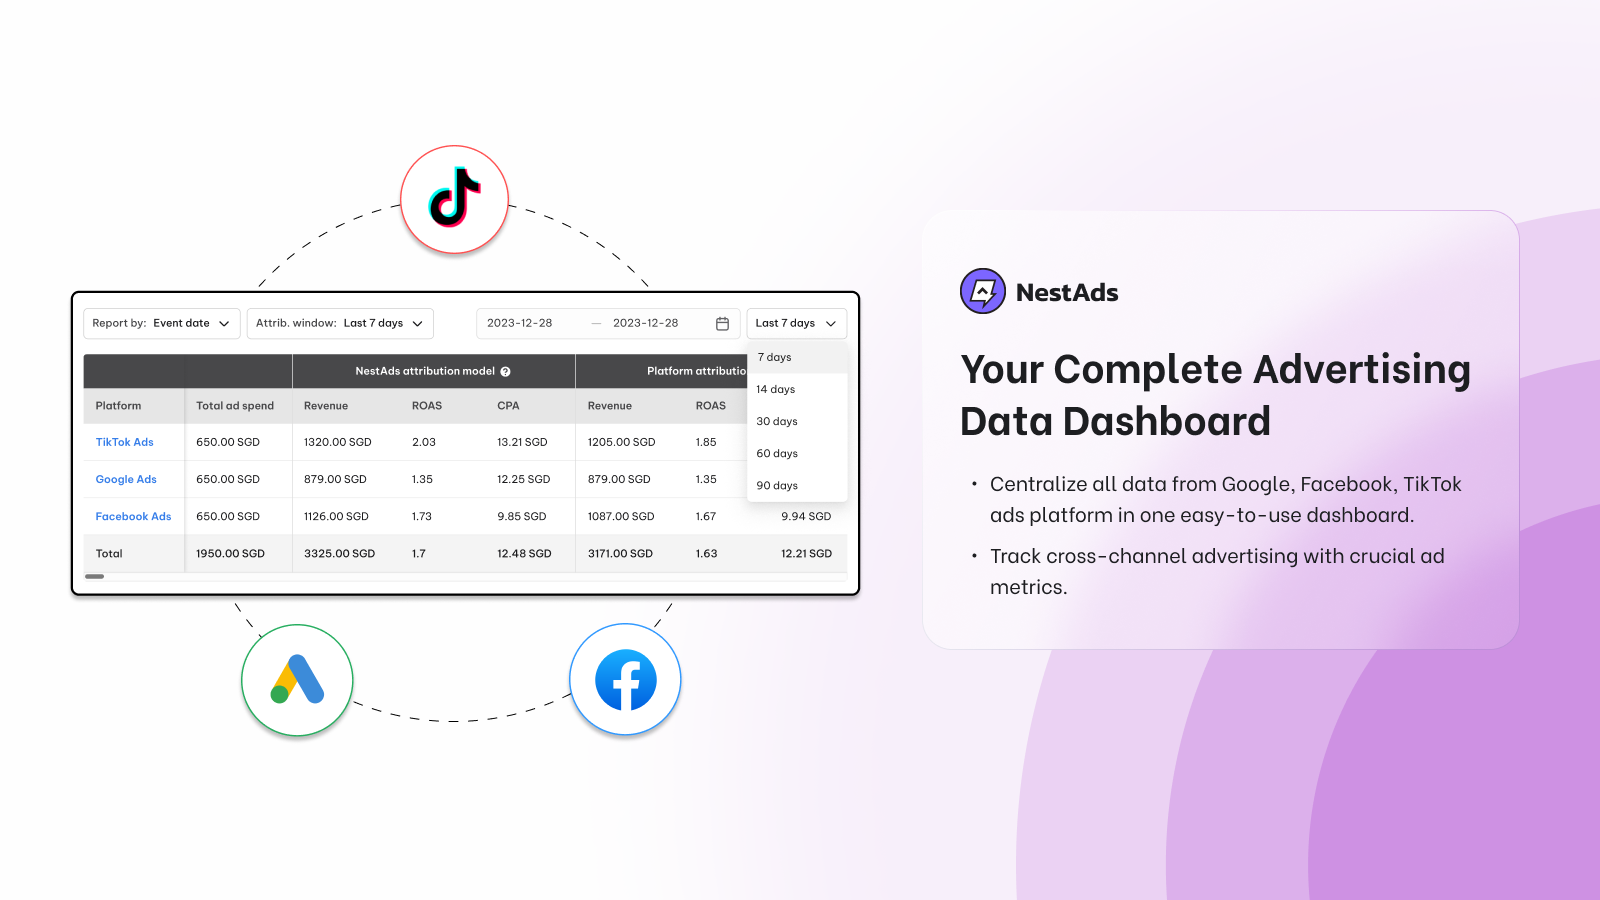 Your complete advertising data dashboard